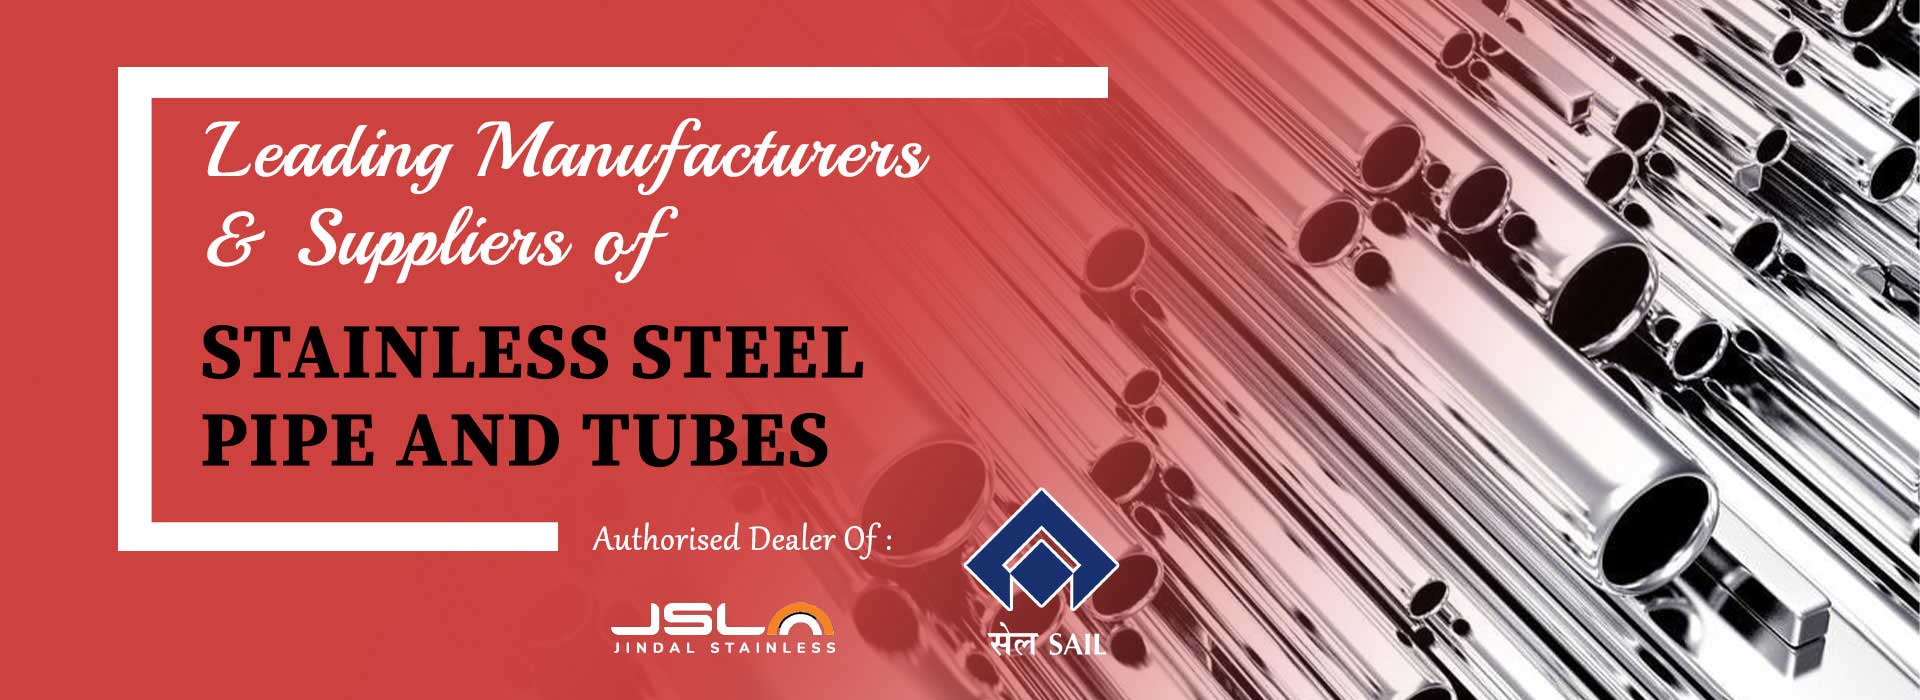 Stainless Steel Pipe and Tubes Manufacturers in Himachal Pradesh